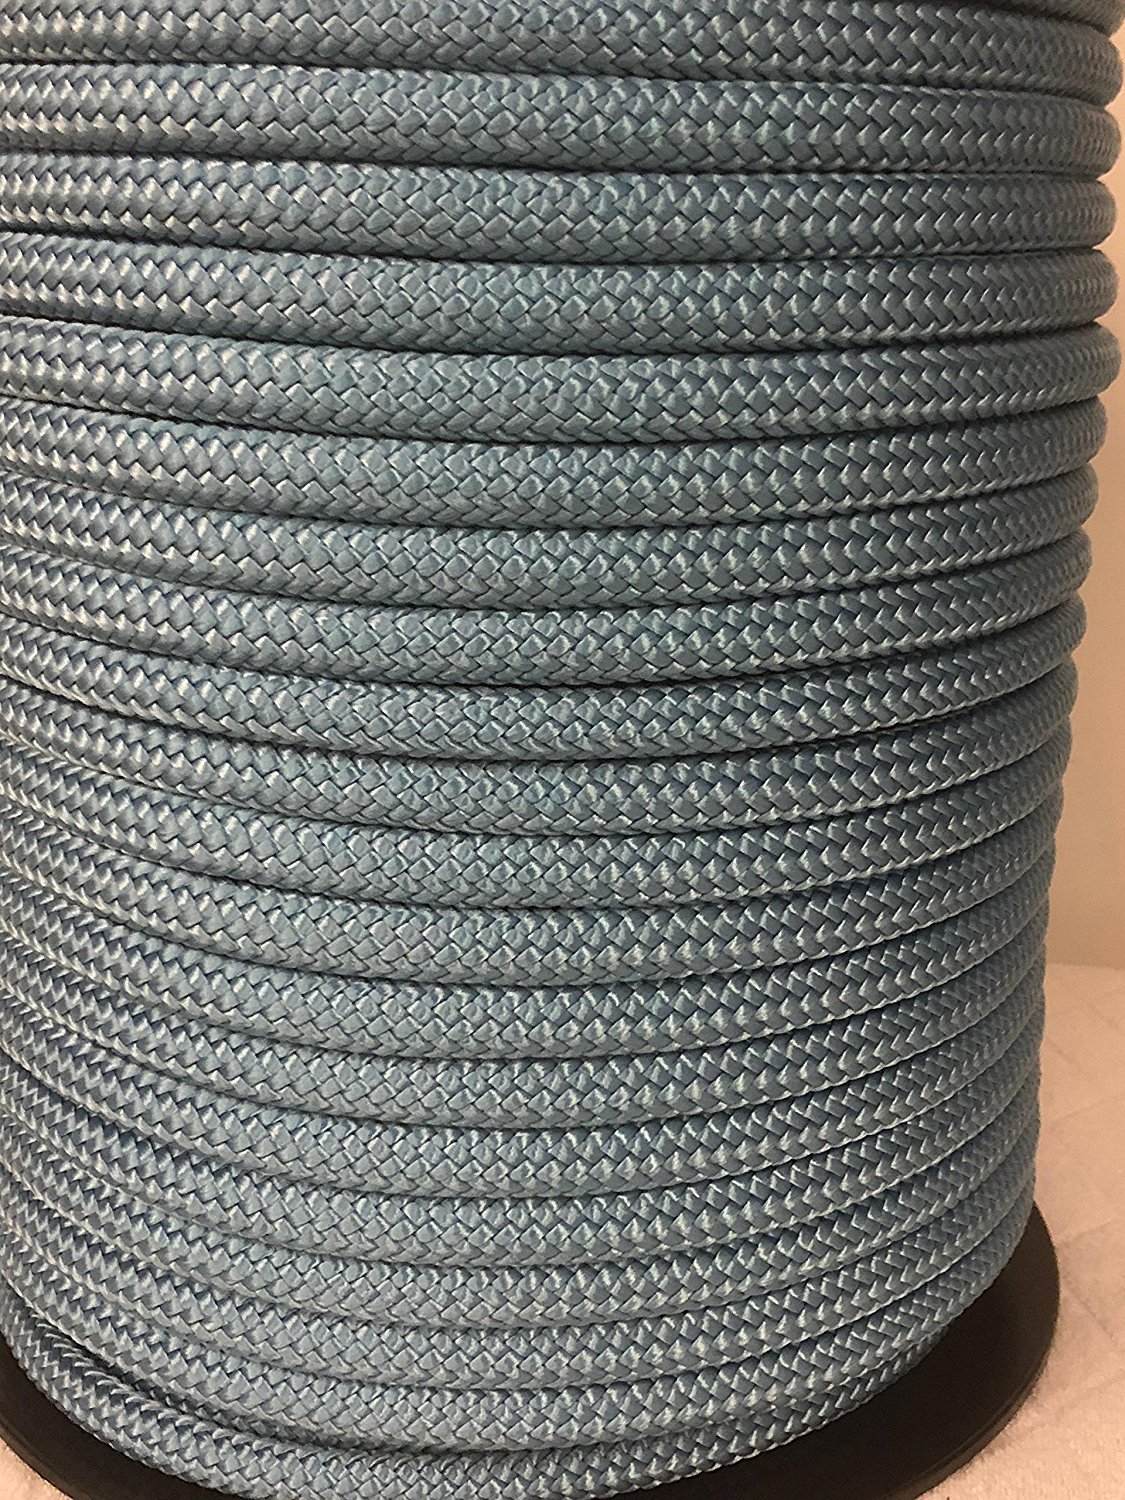 1/2 Double Braided Nylon Rope - Blue Ox Rope